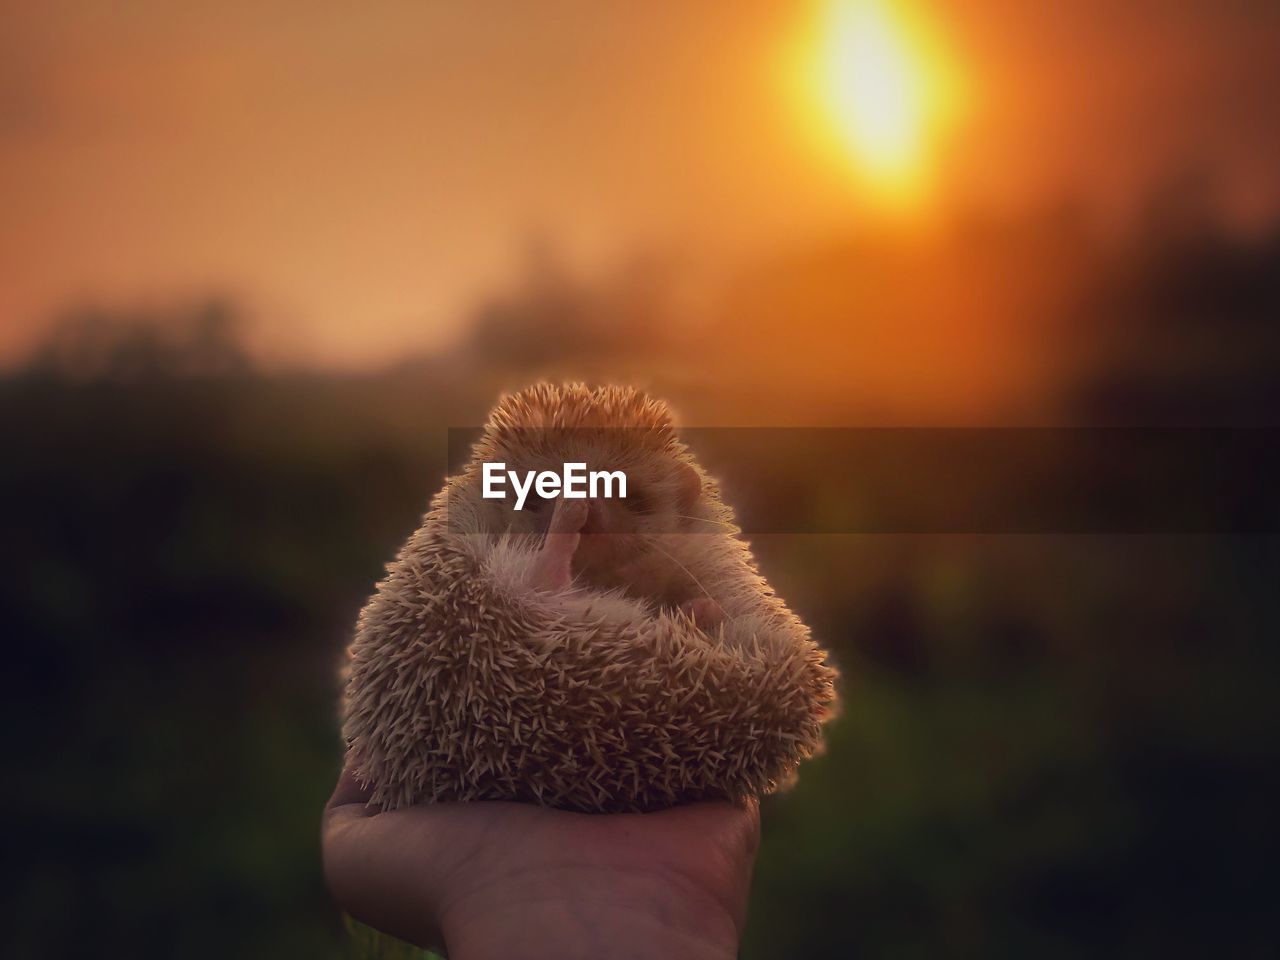 Hedgehog on woman hand with sunset scenery